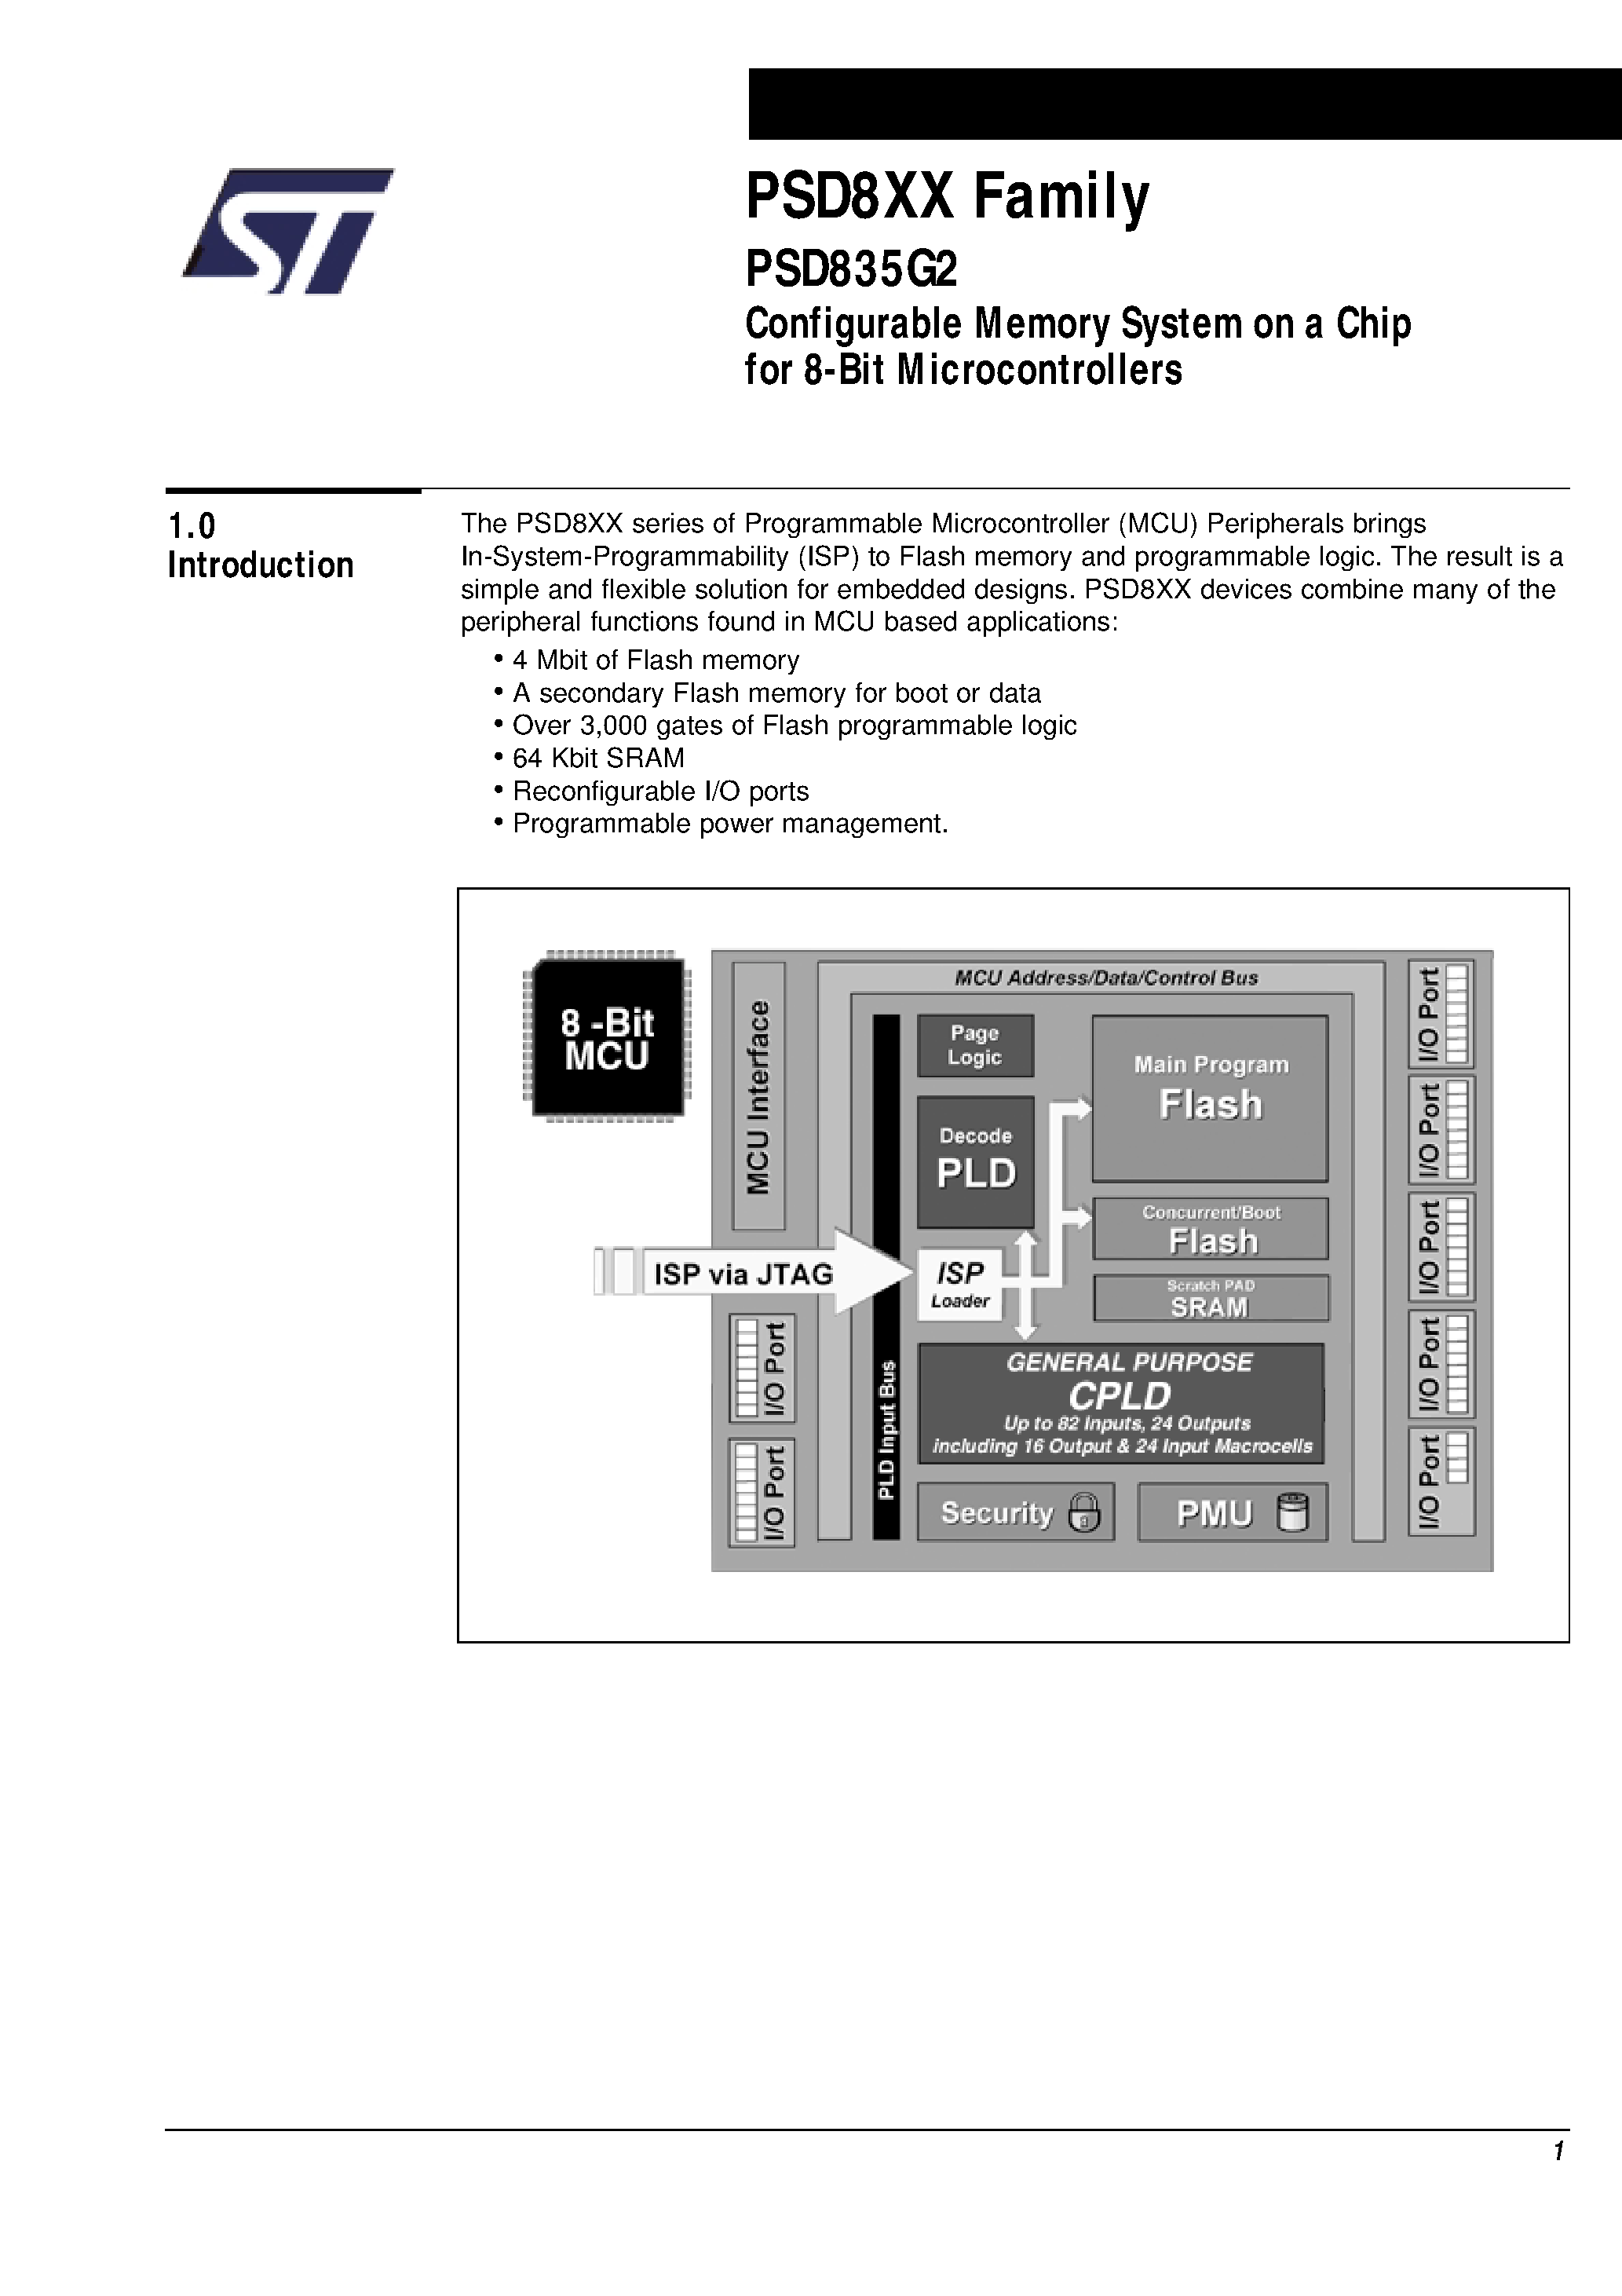 Datasheet PSD835F1V-A-70M - Configurable Memory System on a Chip for 8-Bit Microcontrollers page 2